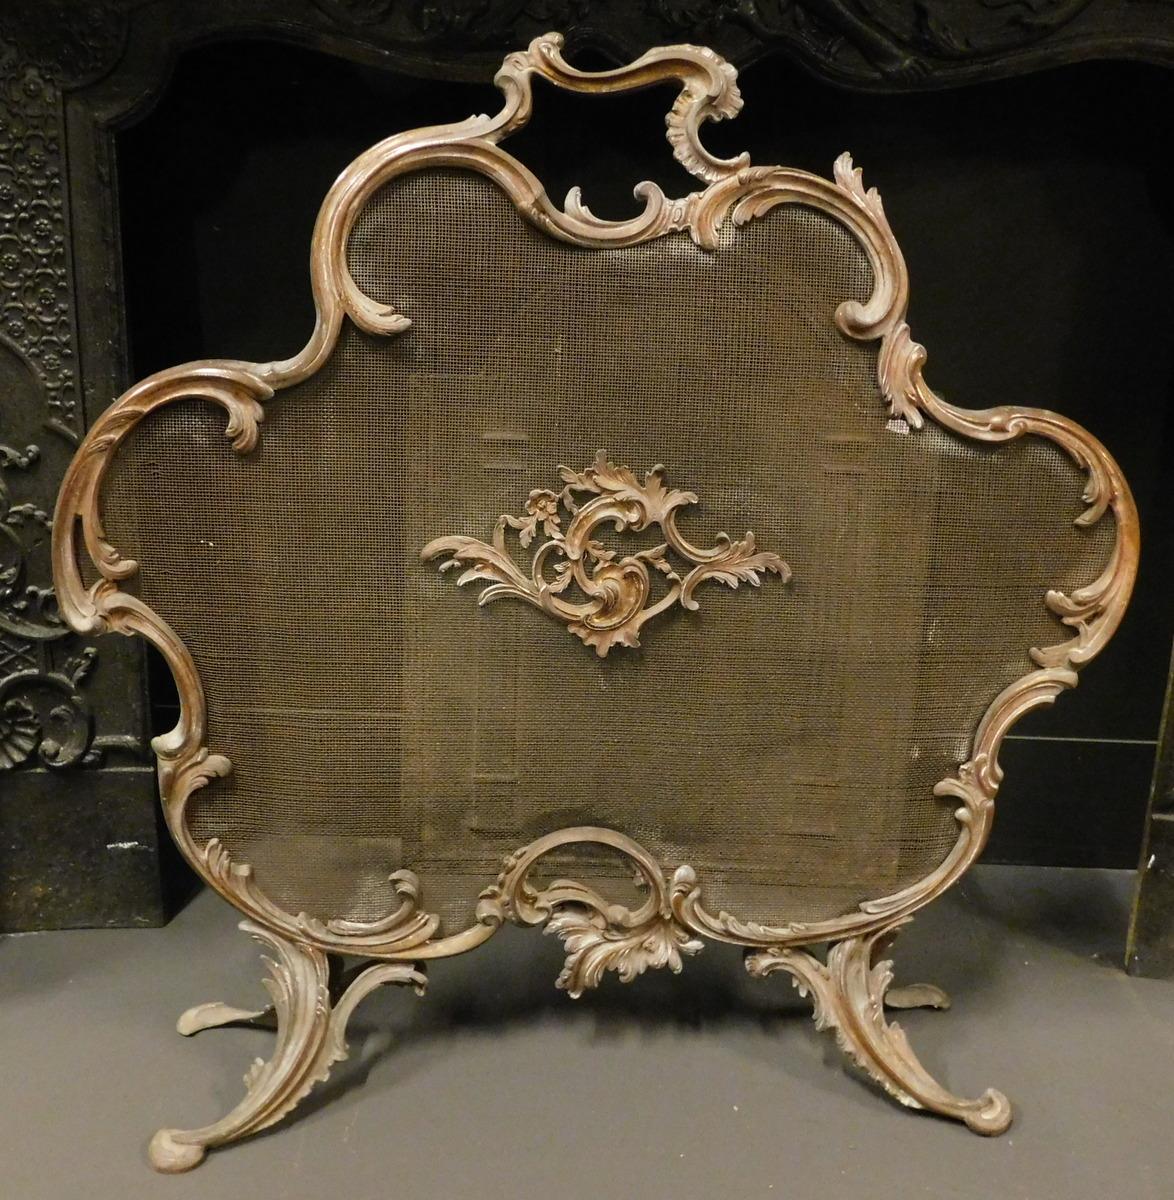 Antique mesh screen with gilt bronze decoration, Rocaille style, coming from France, built in the mid-19th century to decorate the fireplace of a noble house.
Measure cm H 67 x W 69.